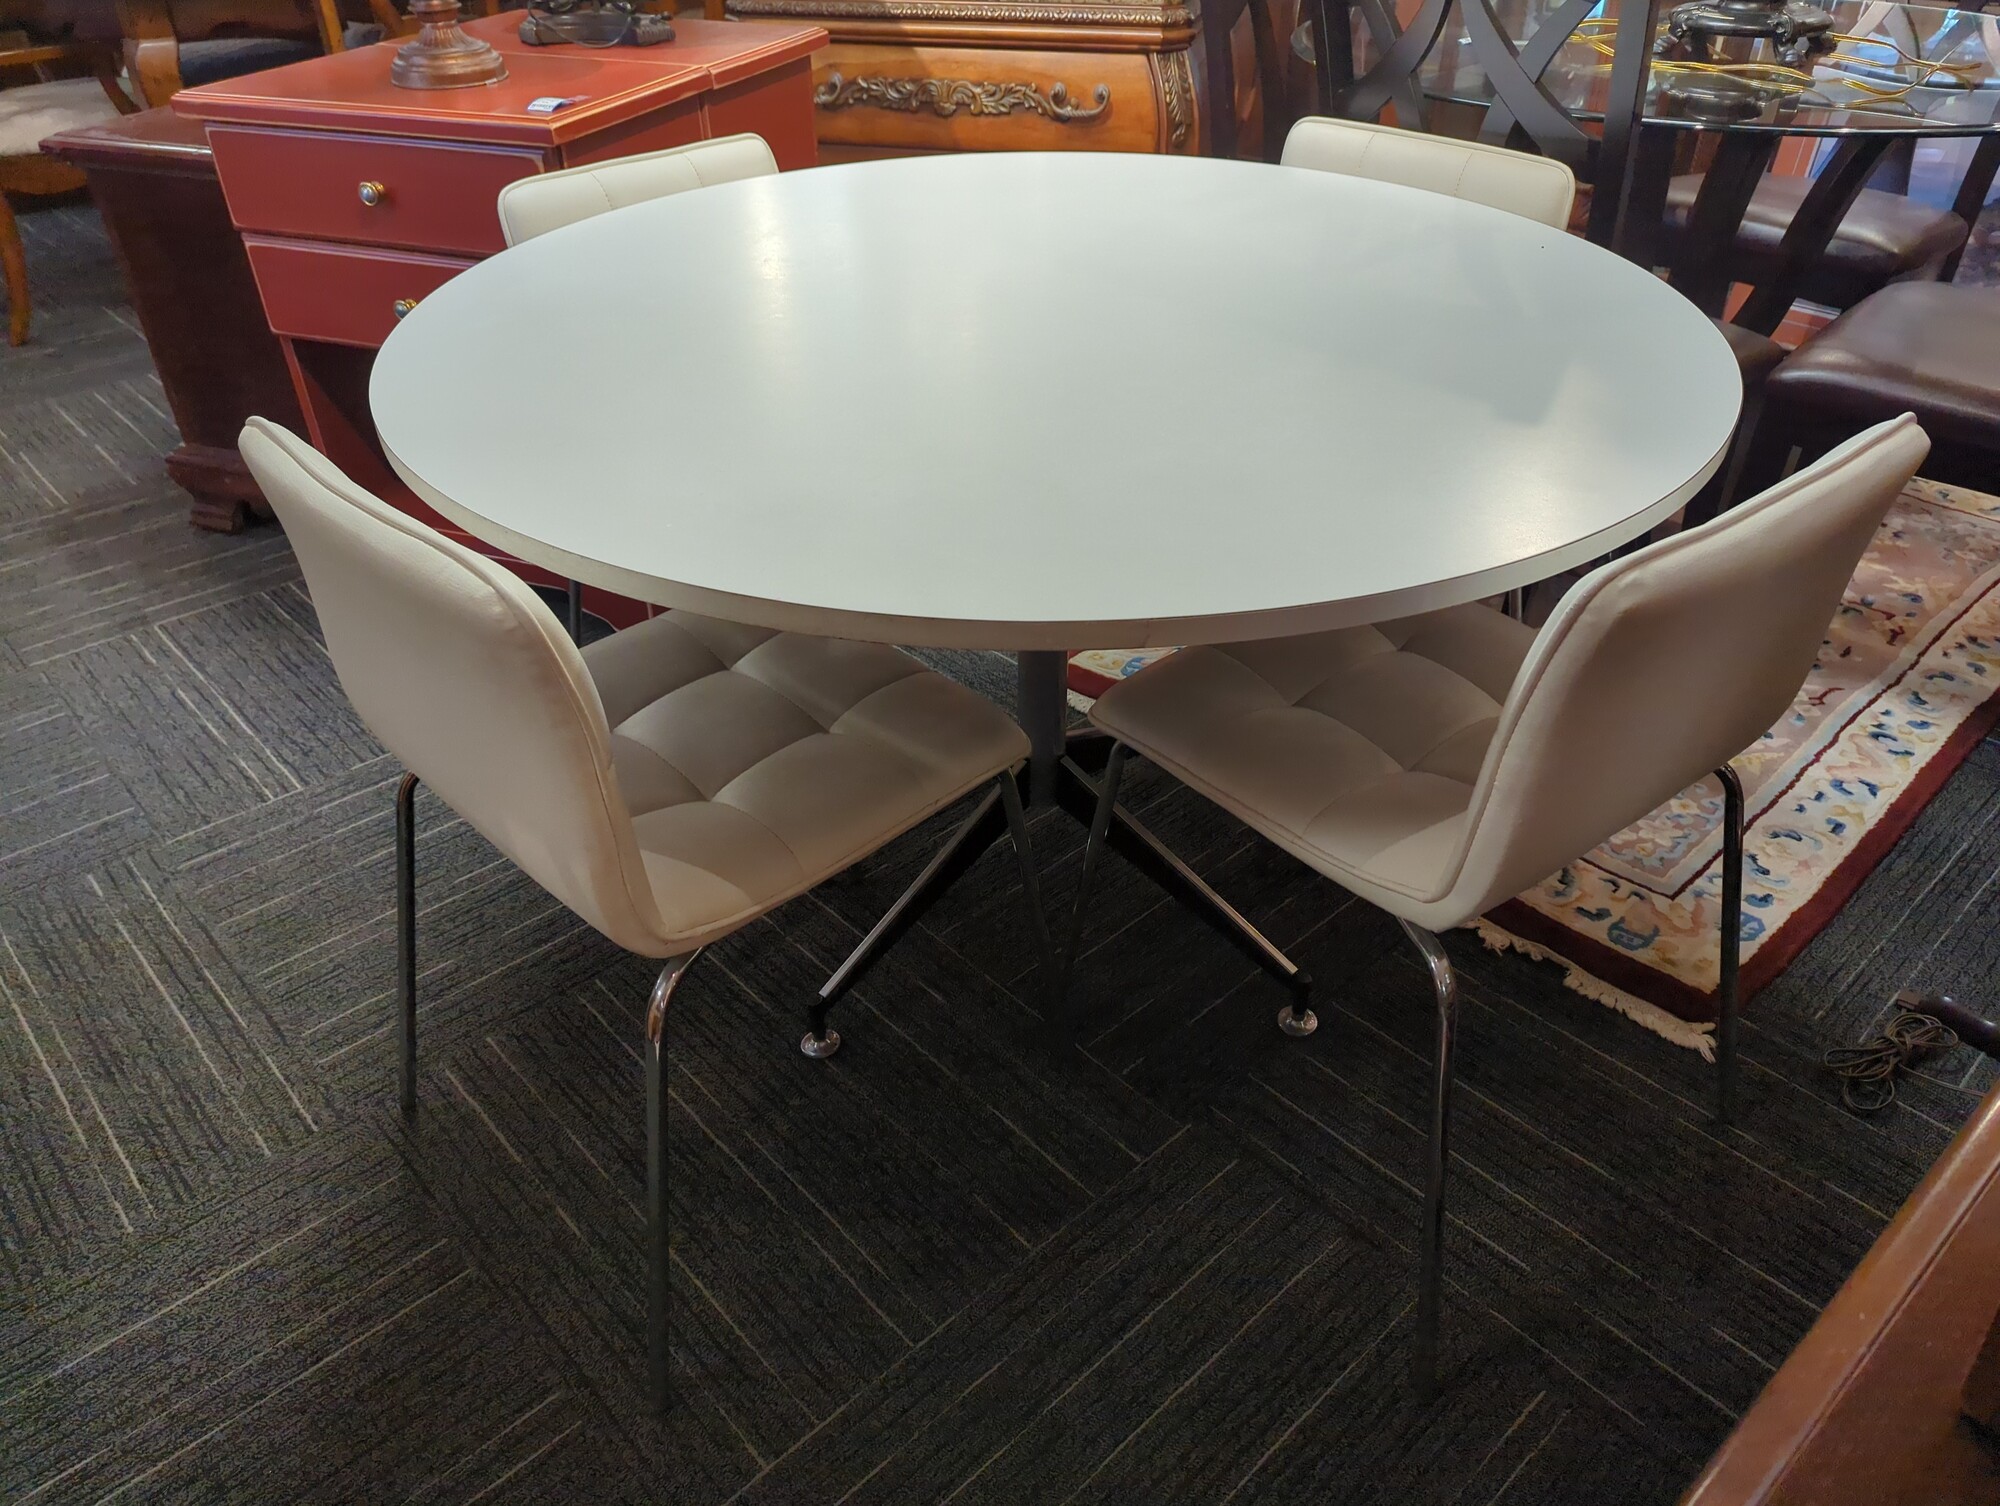 Vintage table with four modern chairs. 48in diameter.